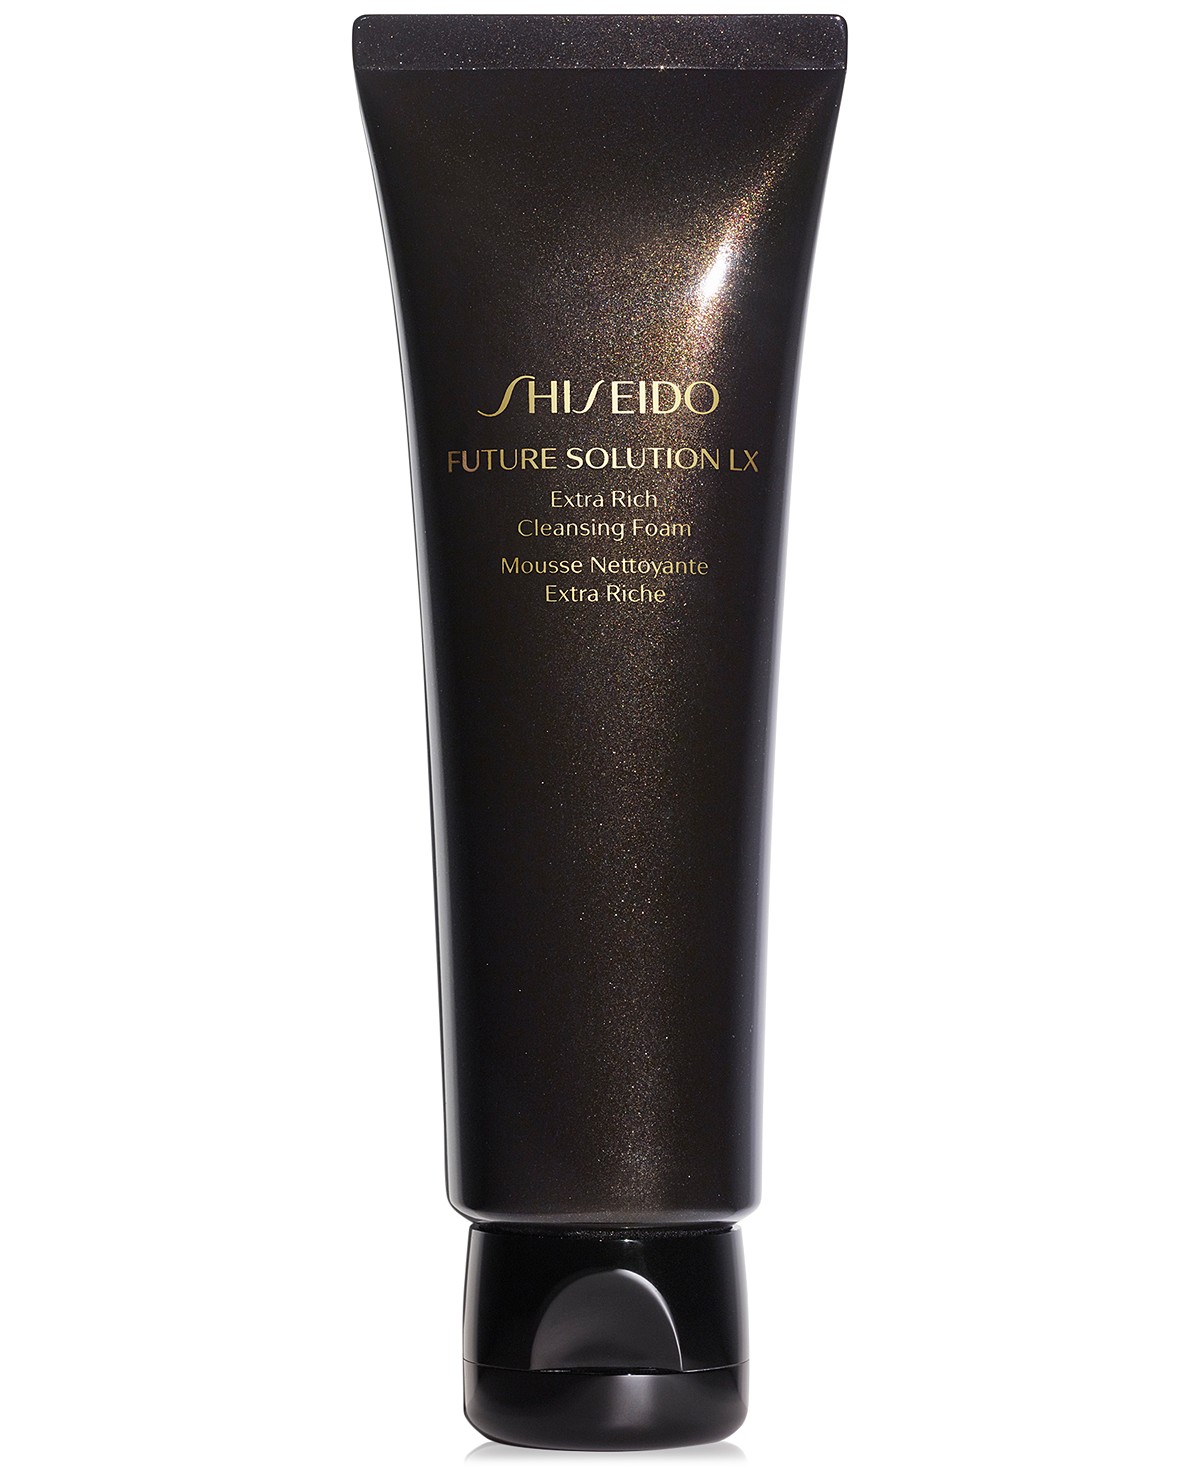 ($60 Value) Shiseido Future Solution LX Extra Rich Cleansing Foam, Face Wash for All Skin Types, 4.7 Oz